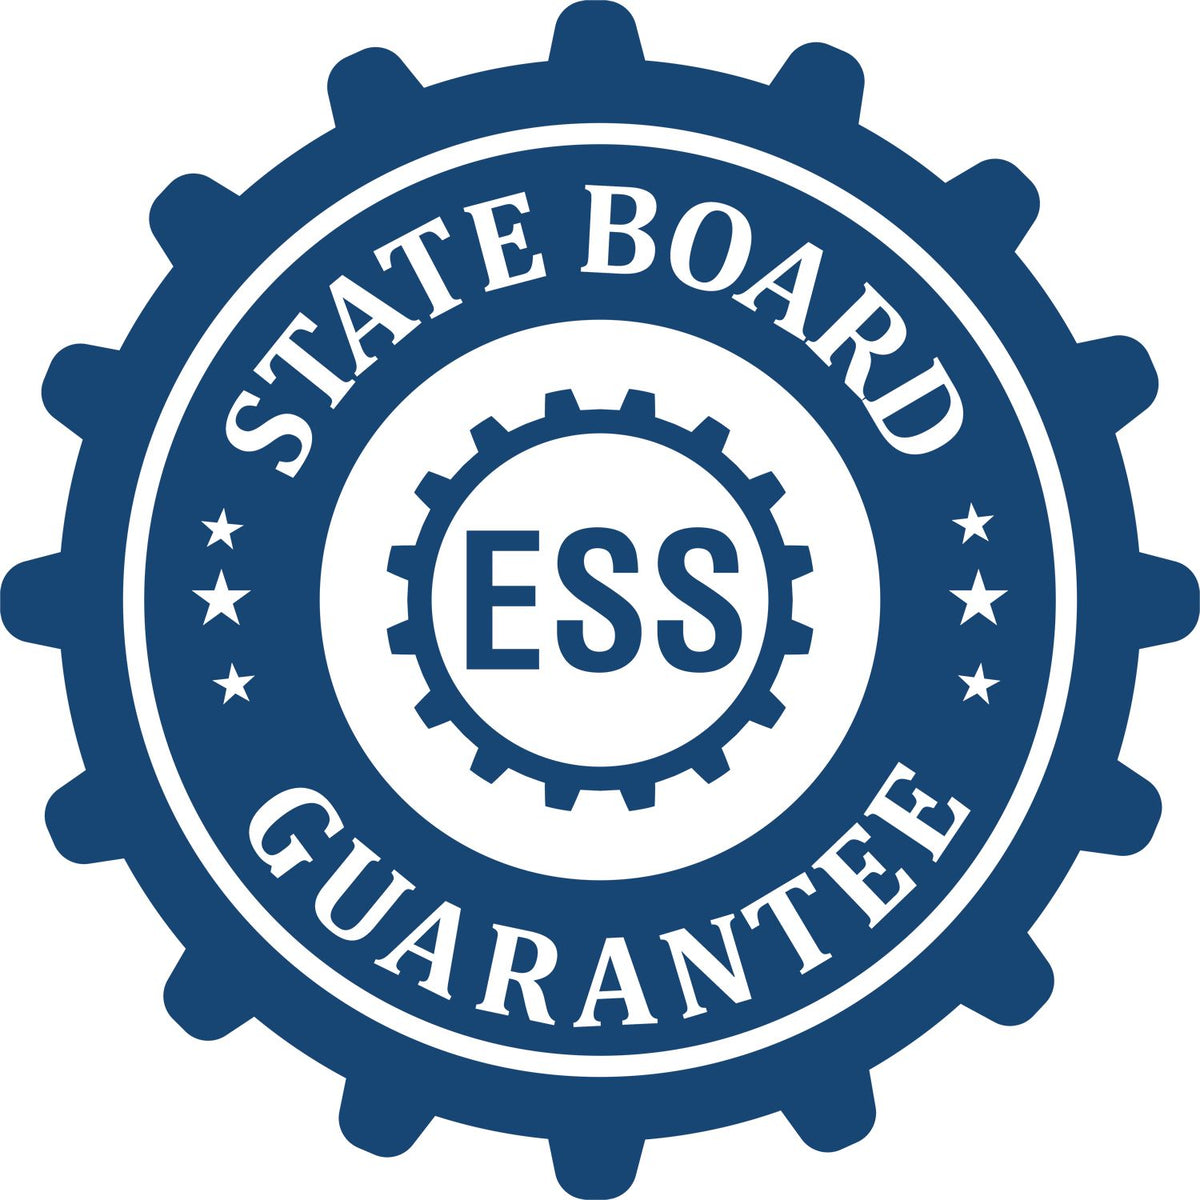 An emblem in a gear shape illustrating a state board guarantee for the Hybrid Arizona Engineer Seal